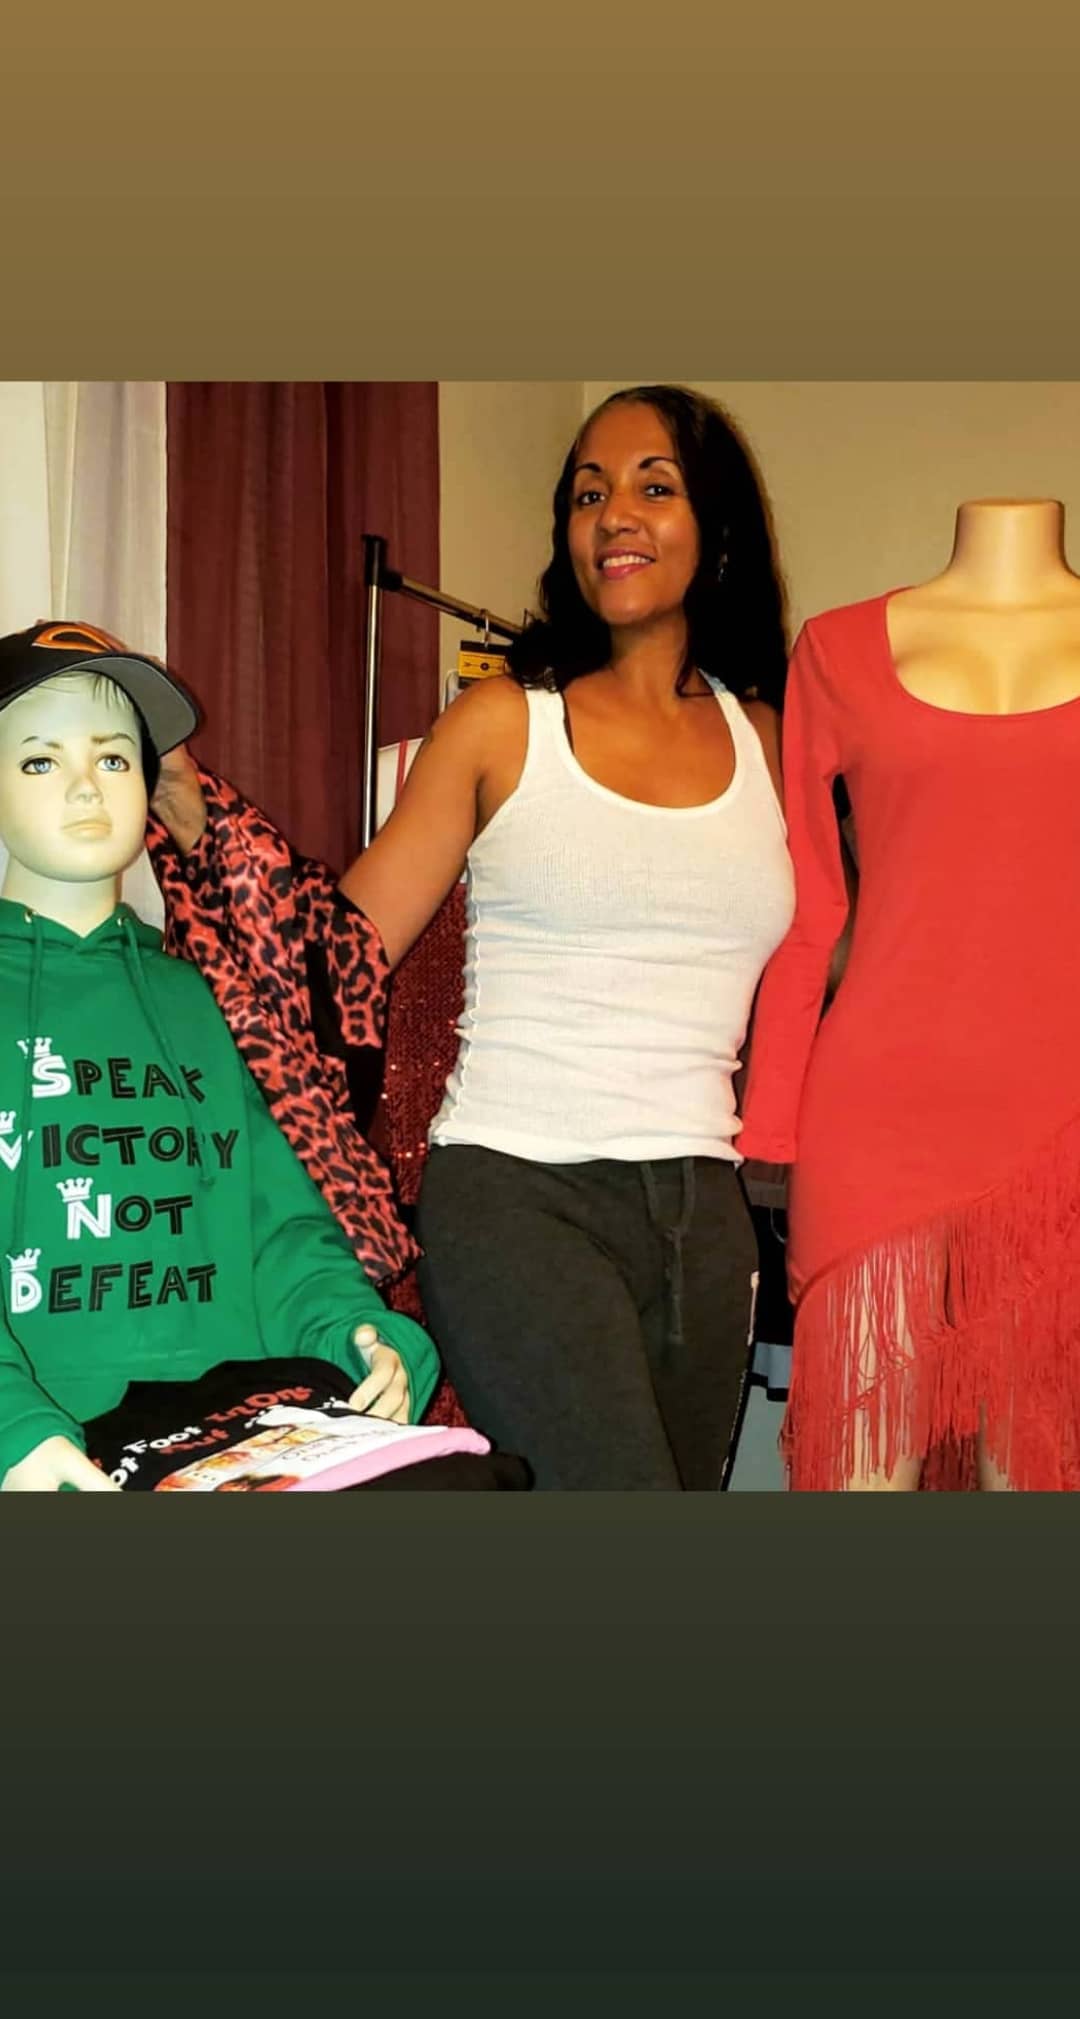 LEARN HOW TO DRESS "MANNEQUINS" WITH DIFFERENT STYLES "COURSE"